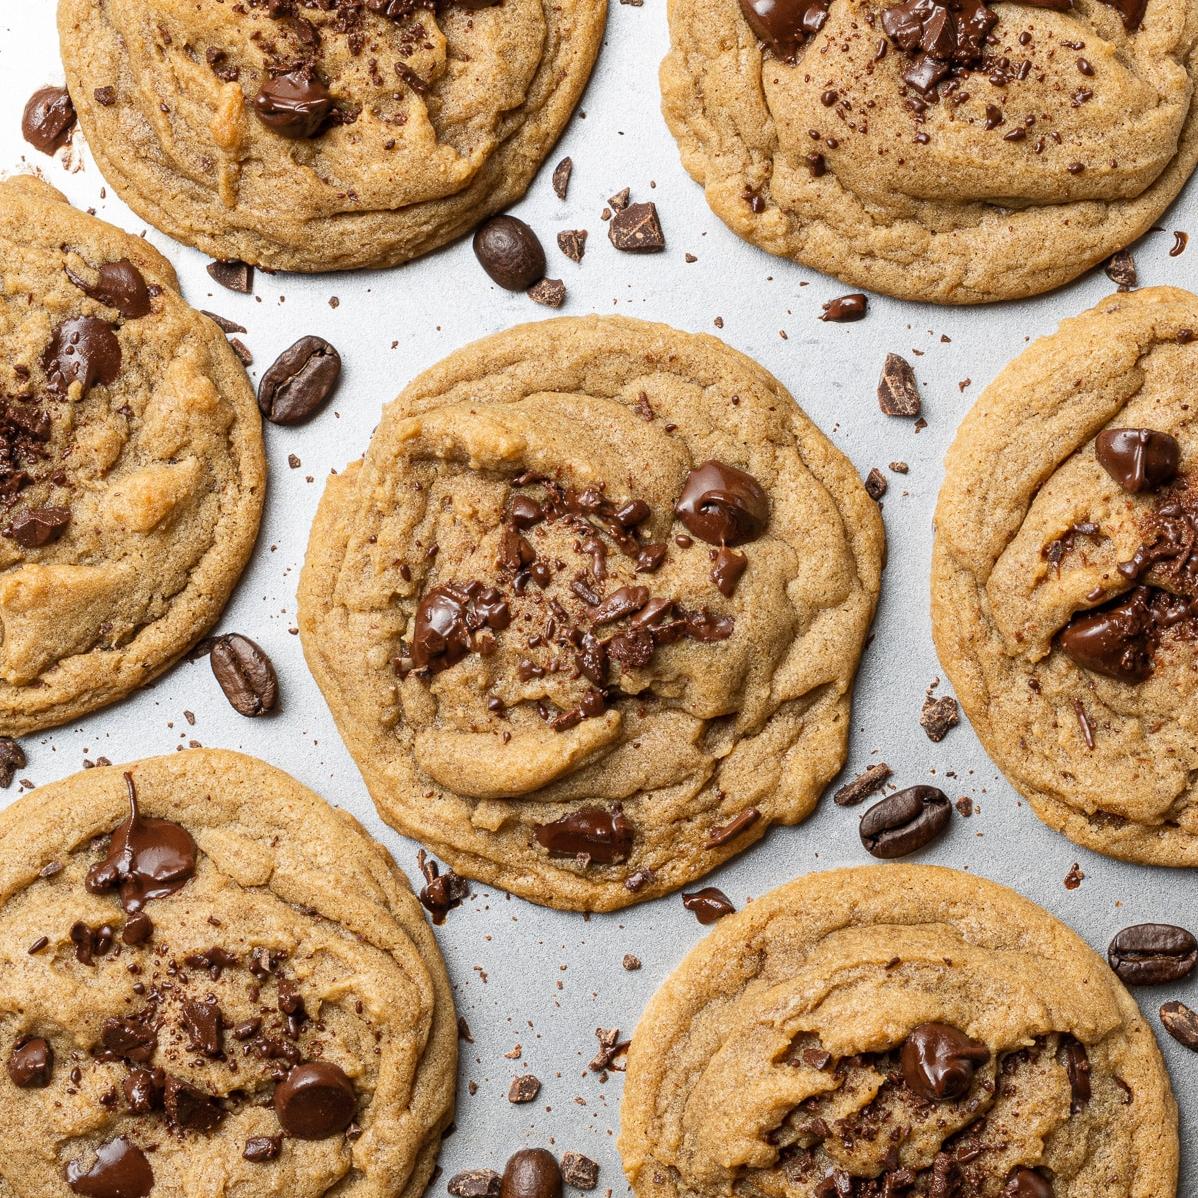  These cookies have a deep, rich coffee flavor that will leave you craving more.